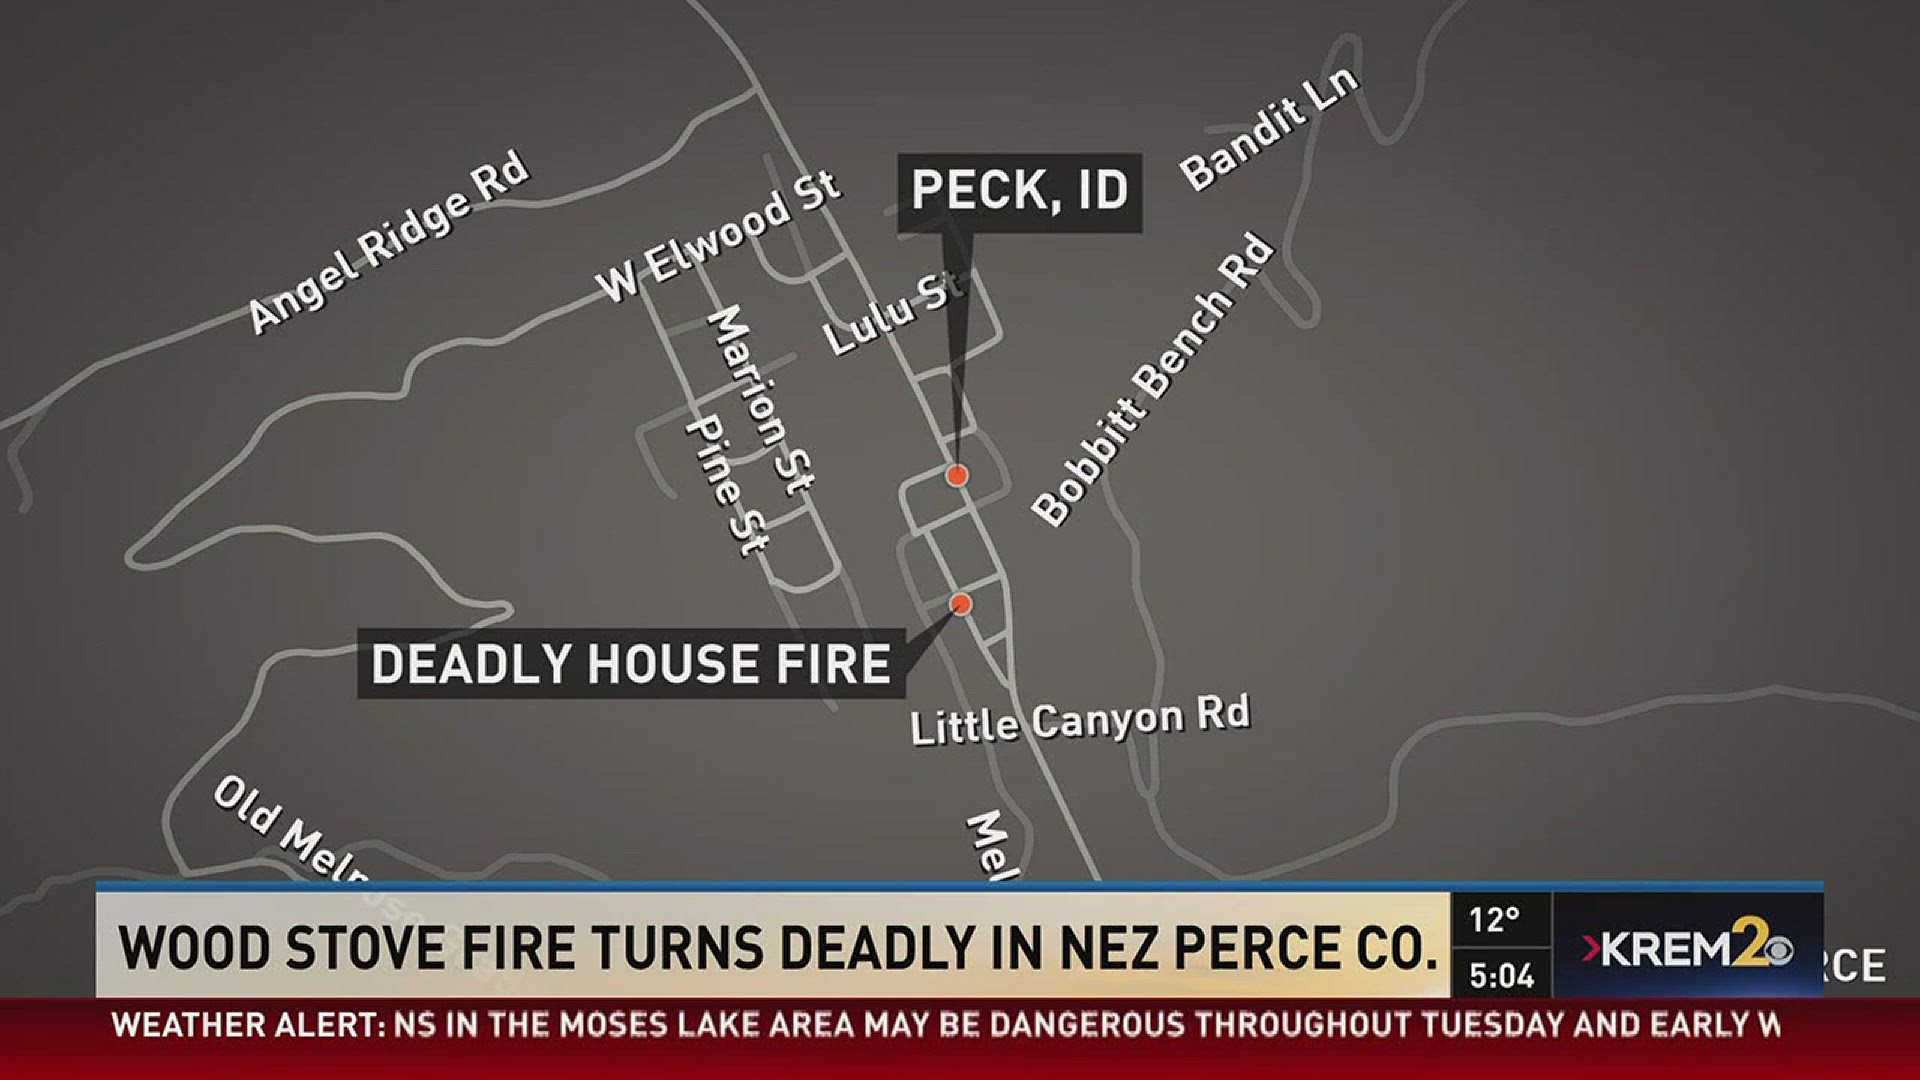 80-year-old woman killed in Nez Perce Co. fire